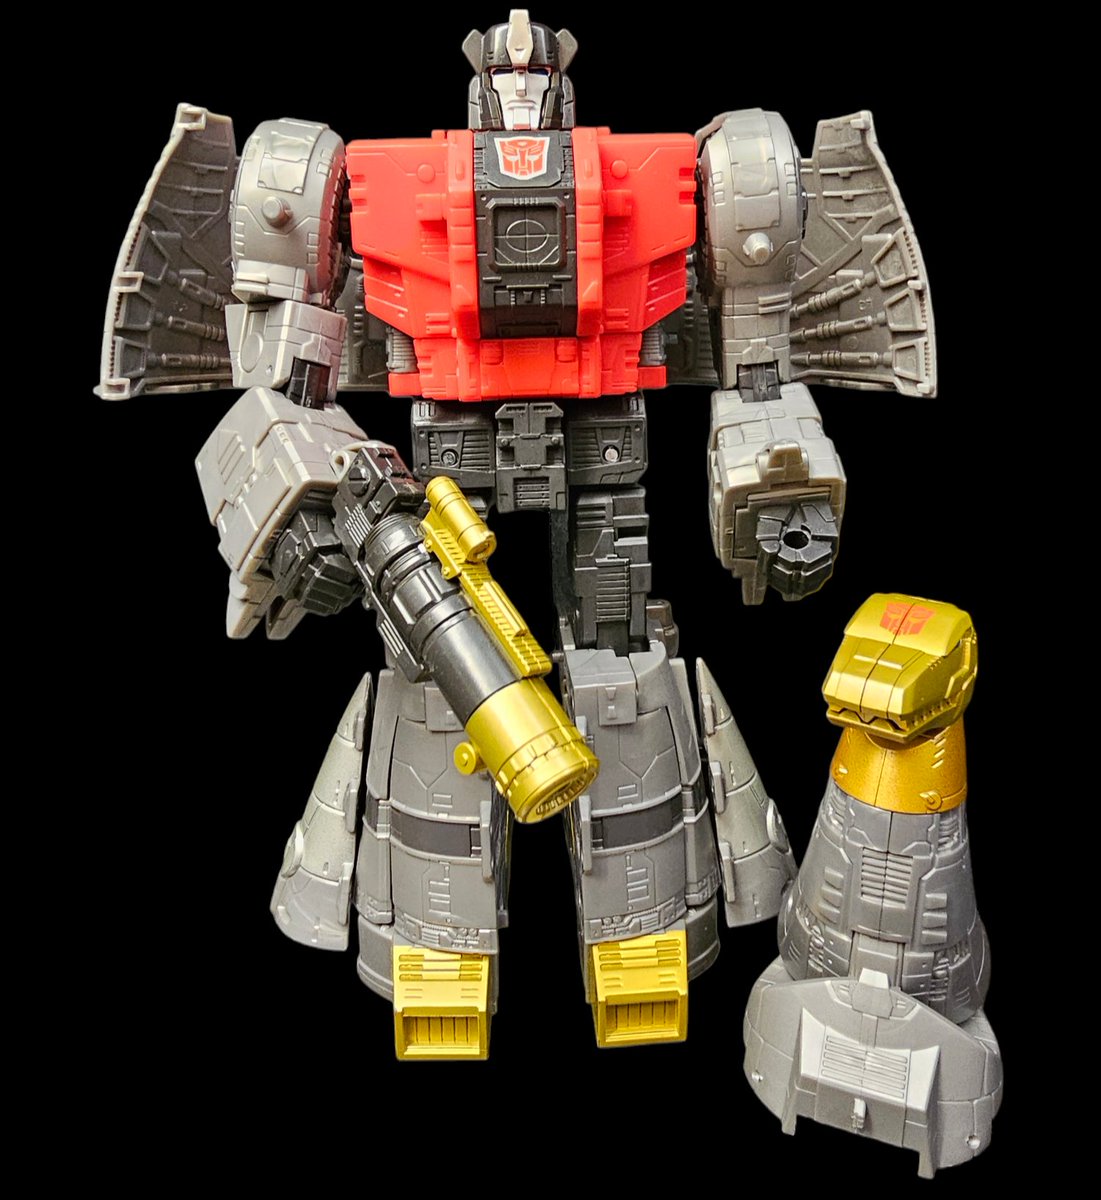 If I could go back in time and invent something, it would be mixing Dinosaurs and Robots. Sludge! #Transformers #Dinobots #StudioSeries86 #Hasbro #TransformersMovie #ActionFigure